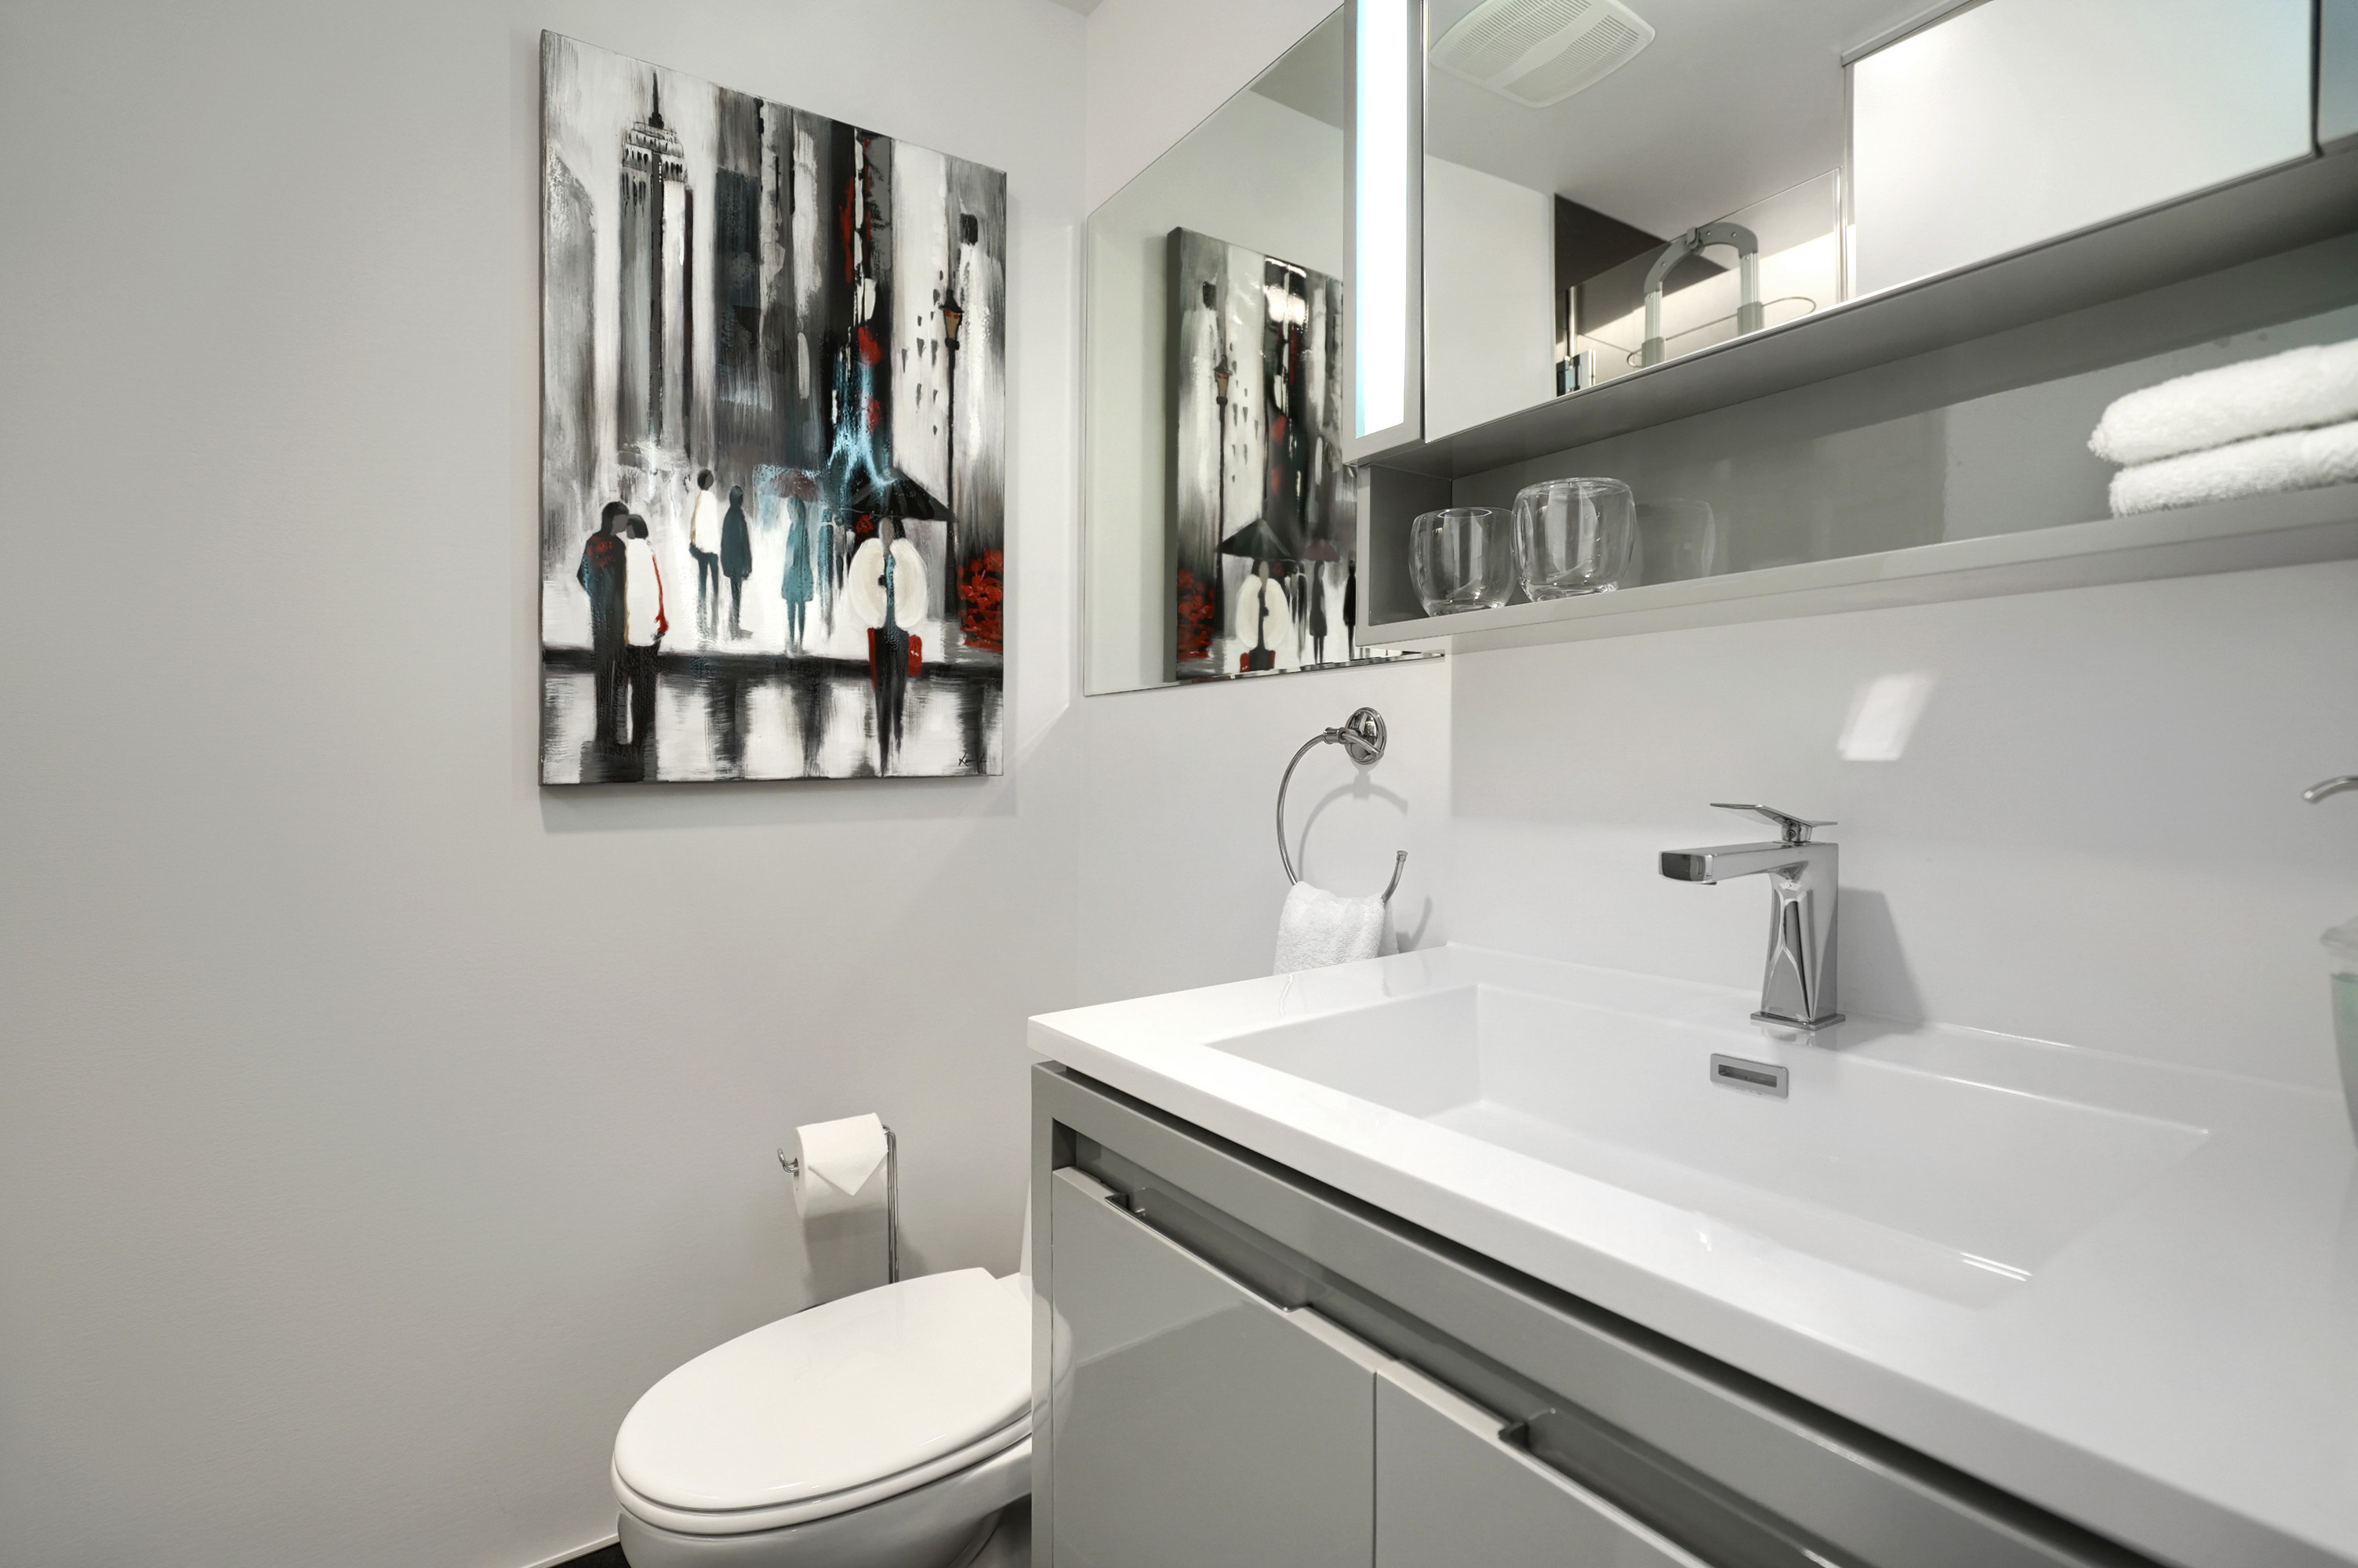 Close-up of the modern bathroom over-sized white sink and stainless faucet. Plenty of mirrors and lighting. Designer accent throughout this bathroom in this furnished executive housing apartment in montreal